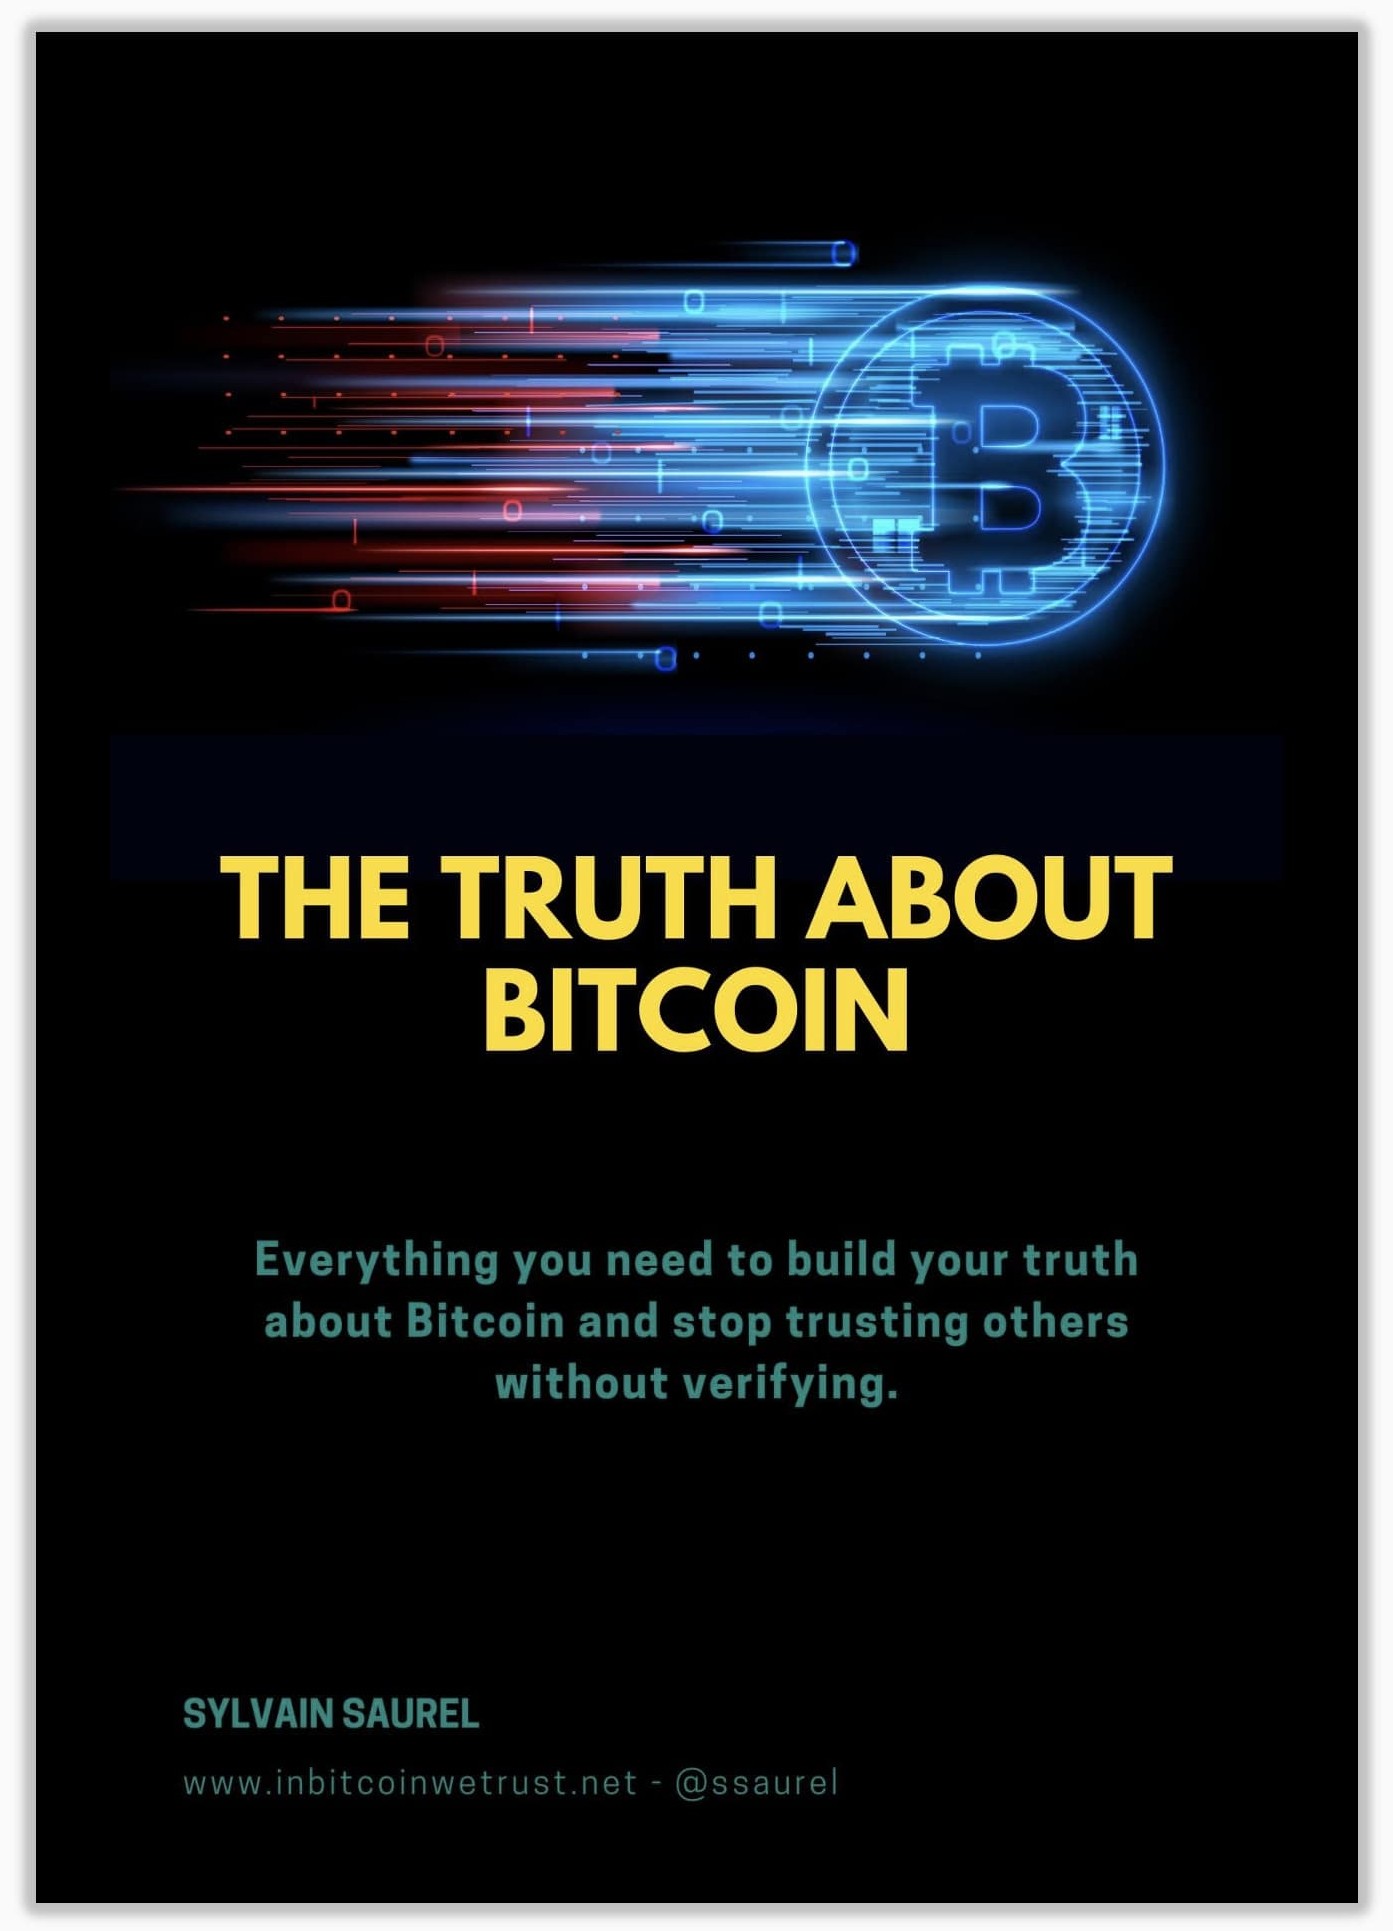 The Truth About Bitcoin: Everything you need to build your truth about Bitcoin and stop trusting others without verifying.